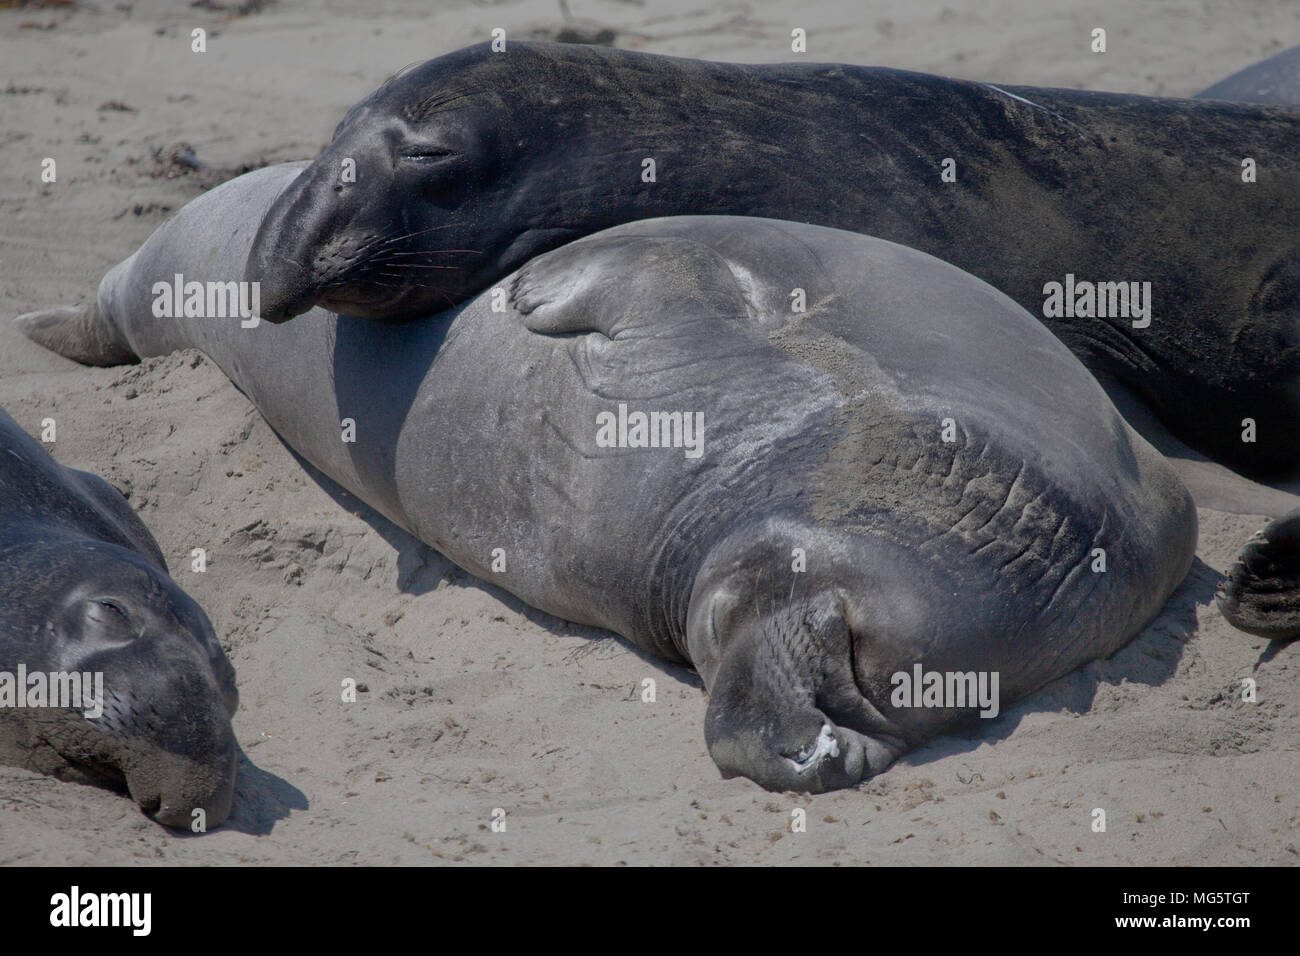 Northern elephant seals on Piedras Blancas beach, near San Simeon, California in August, the end of the moulting (molting) season. Stock Photo